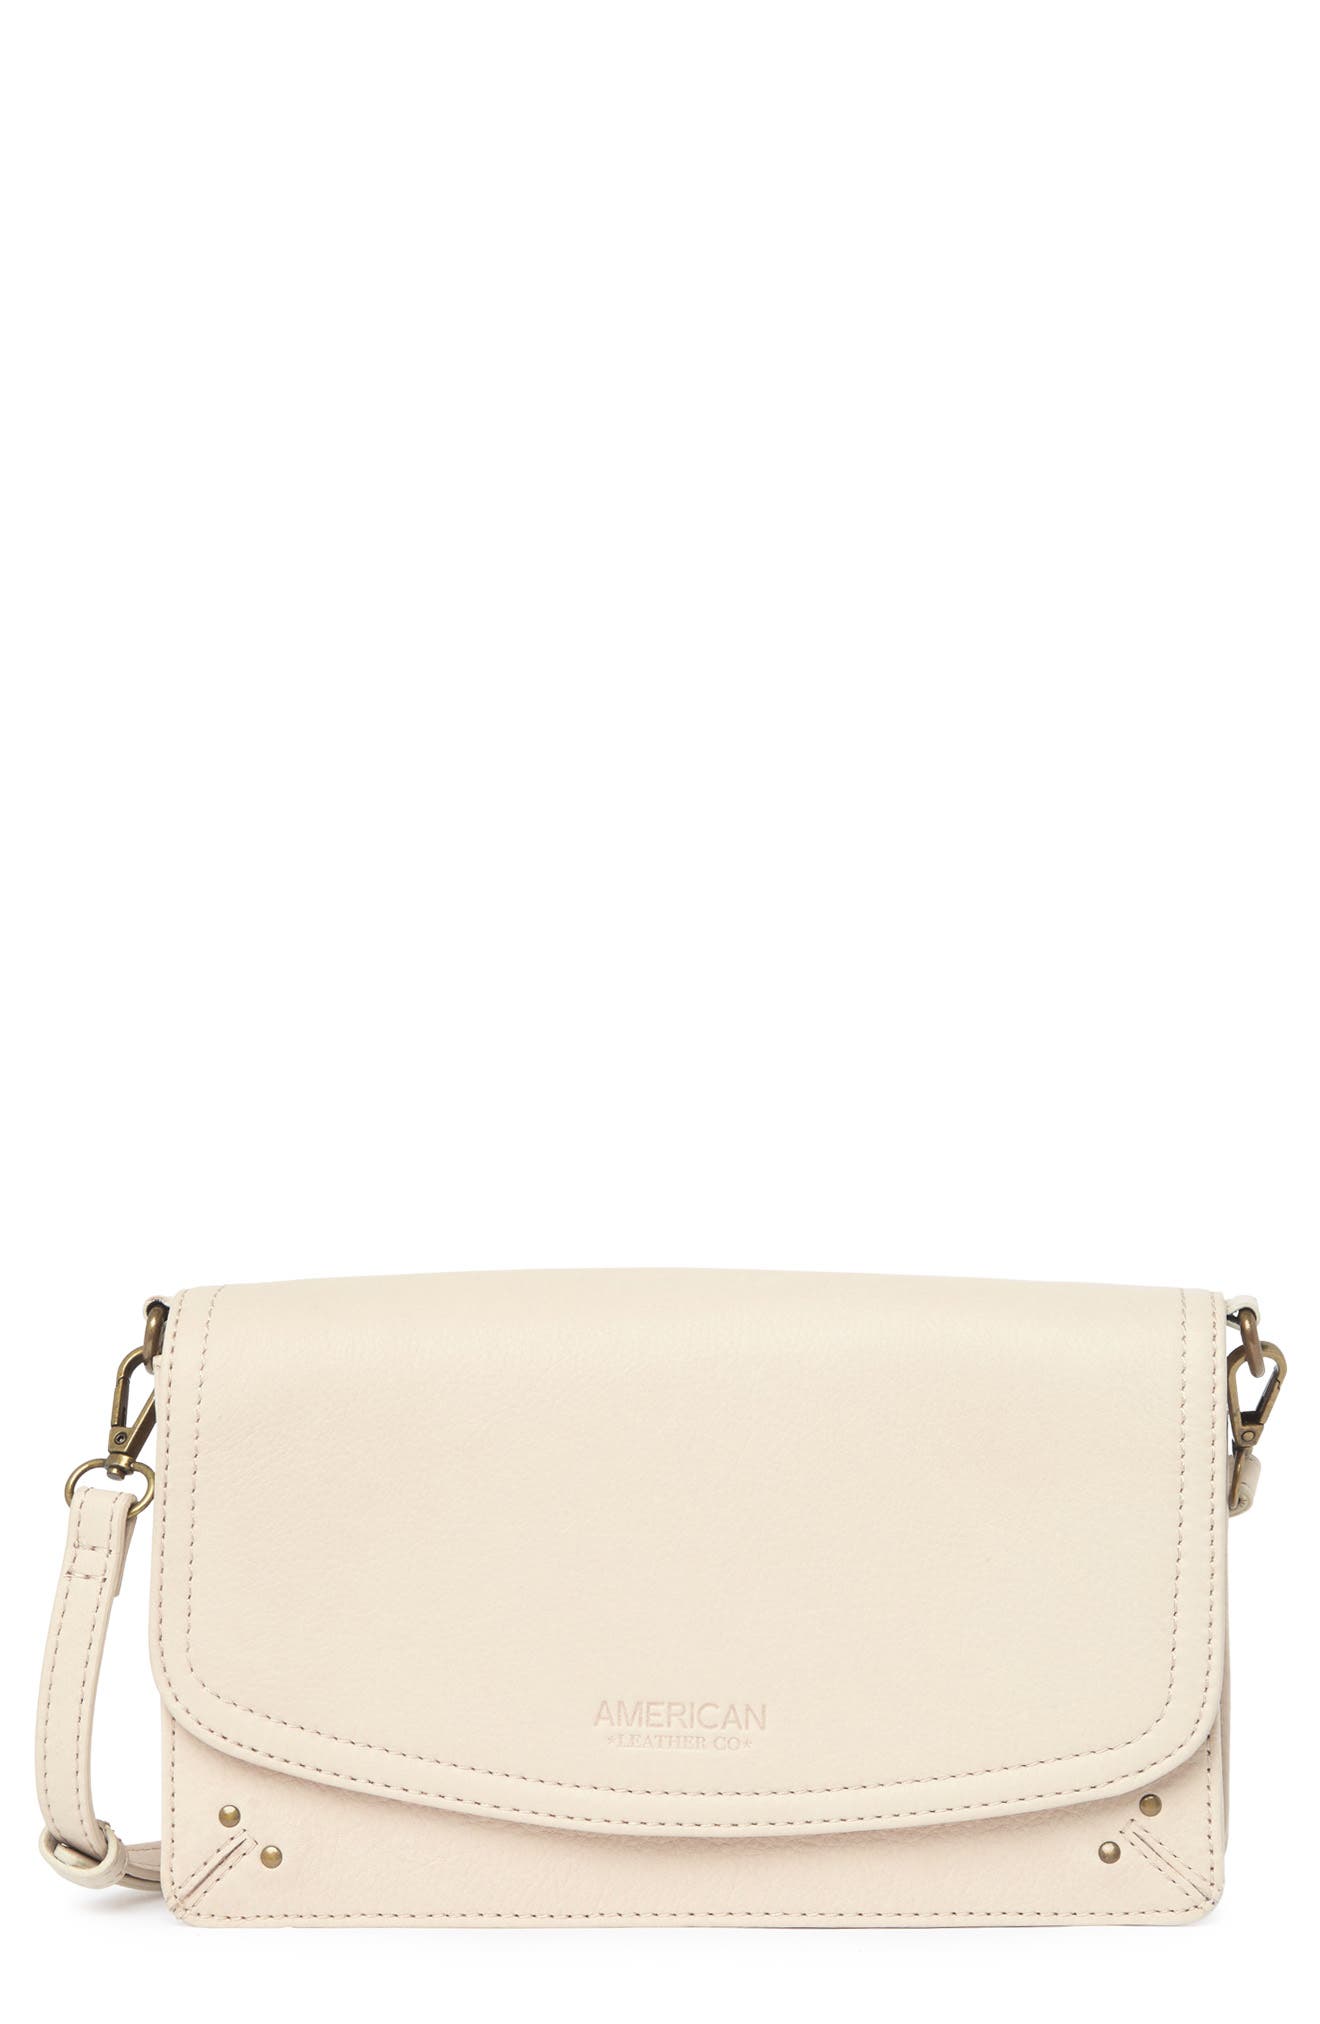 American Leather Co. Brenton Leather Crossbody Bag In Stone Smooth